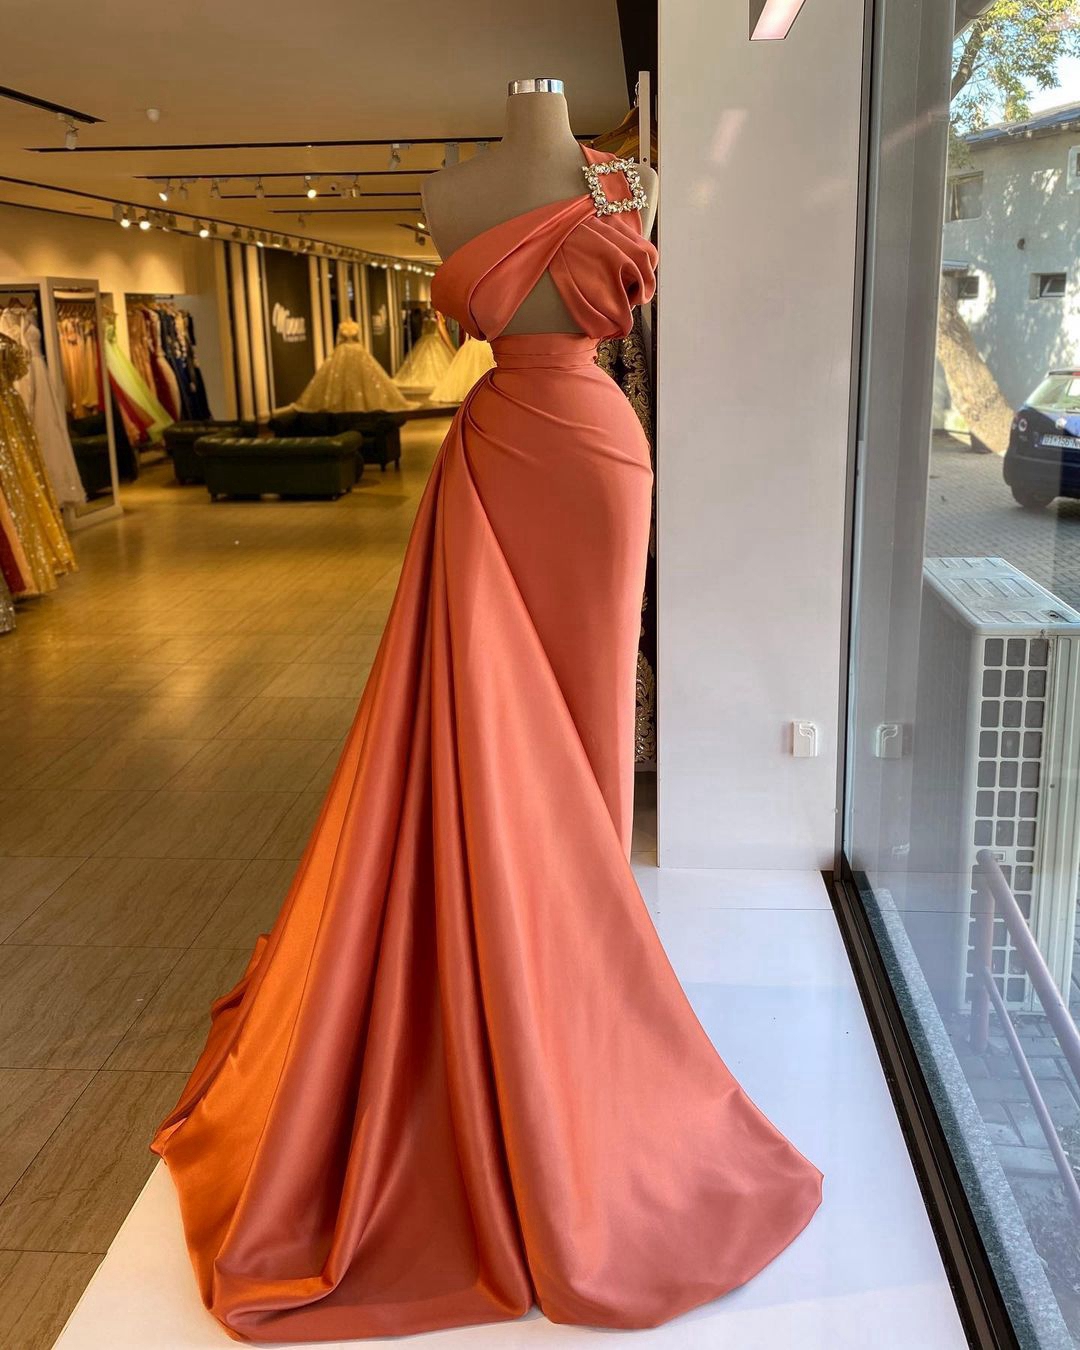 Satin Prom Dresses, High Neck Prom Dresses, One Shoulder Prom Dresses, Party Dresses, Coral Prom Dresses, Satin Evening Gowns, 2022 Evening